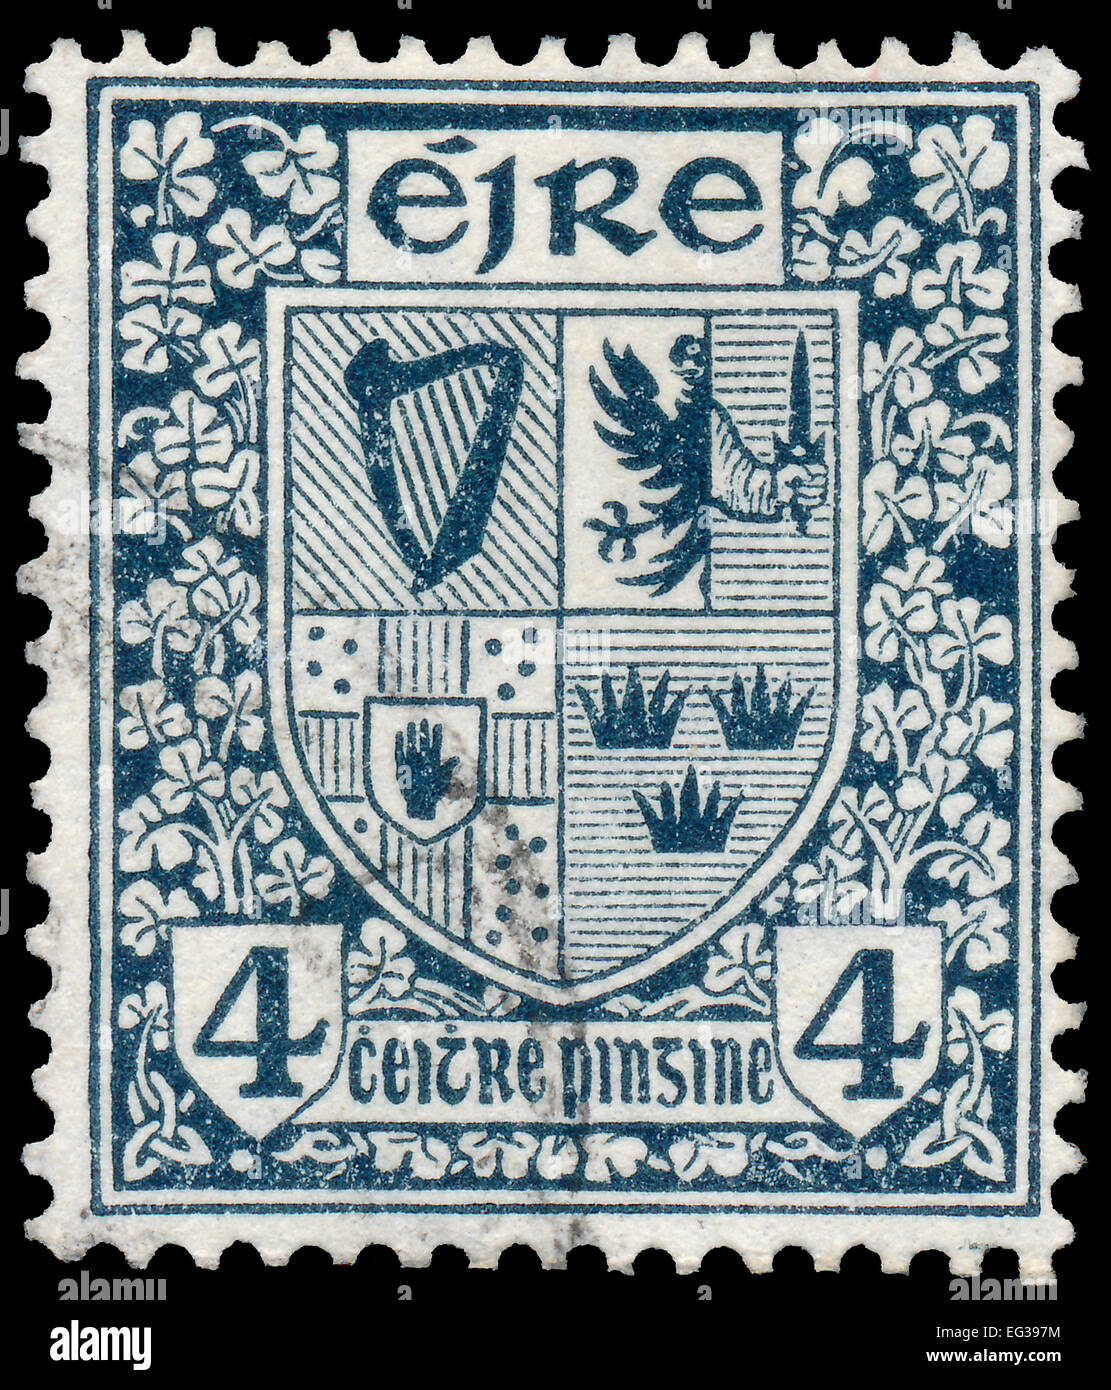 IRELAND - CIRCA 1922: A stamp printed in Ireland shows Coat of Arms of the Four Provinces of Ireland, without the inscription, f Stock Photo